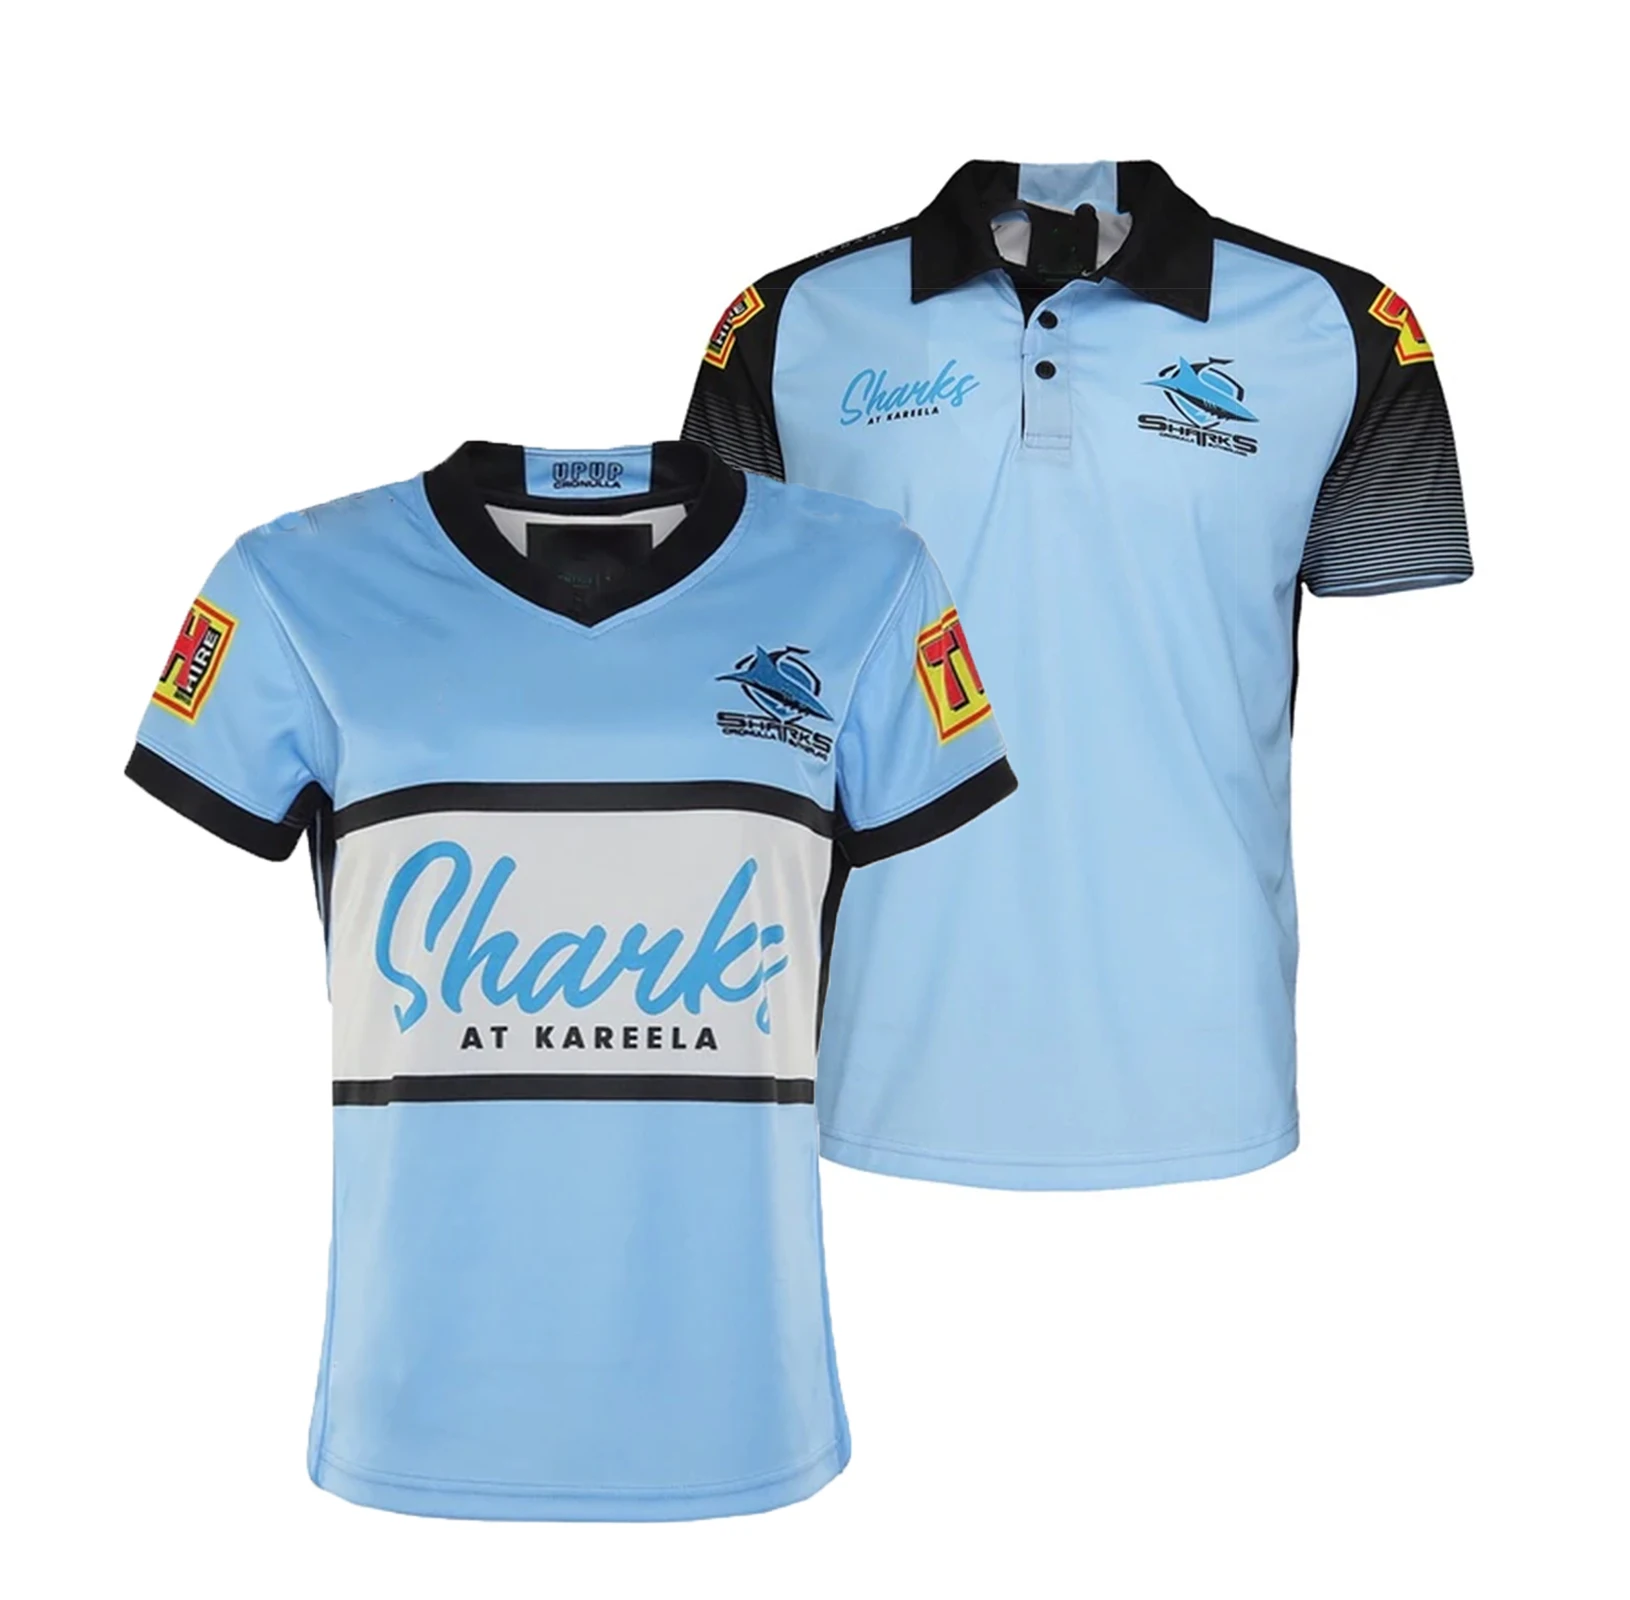 

Cronulla-Sutherland Sharks 2021 Men's Replica Home Jersey Rugby T-Shirt S-5XL